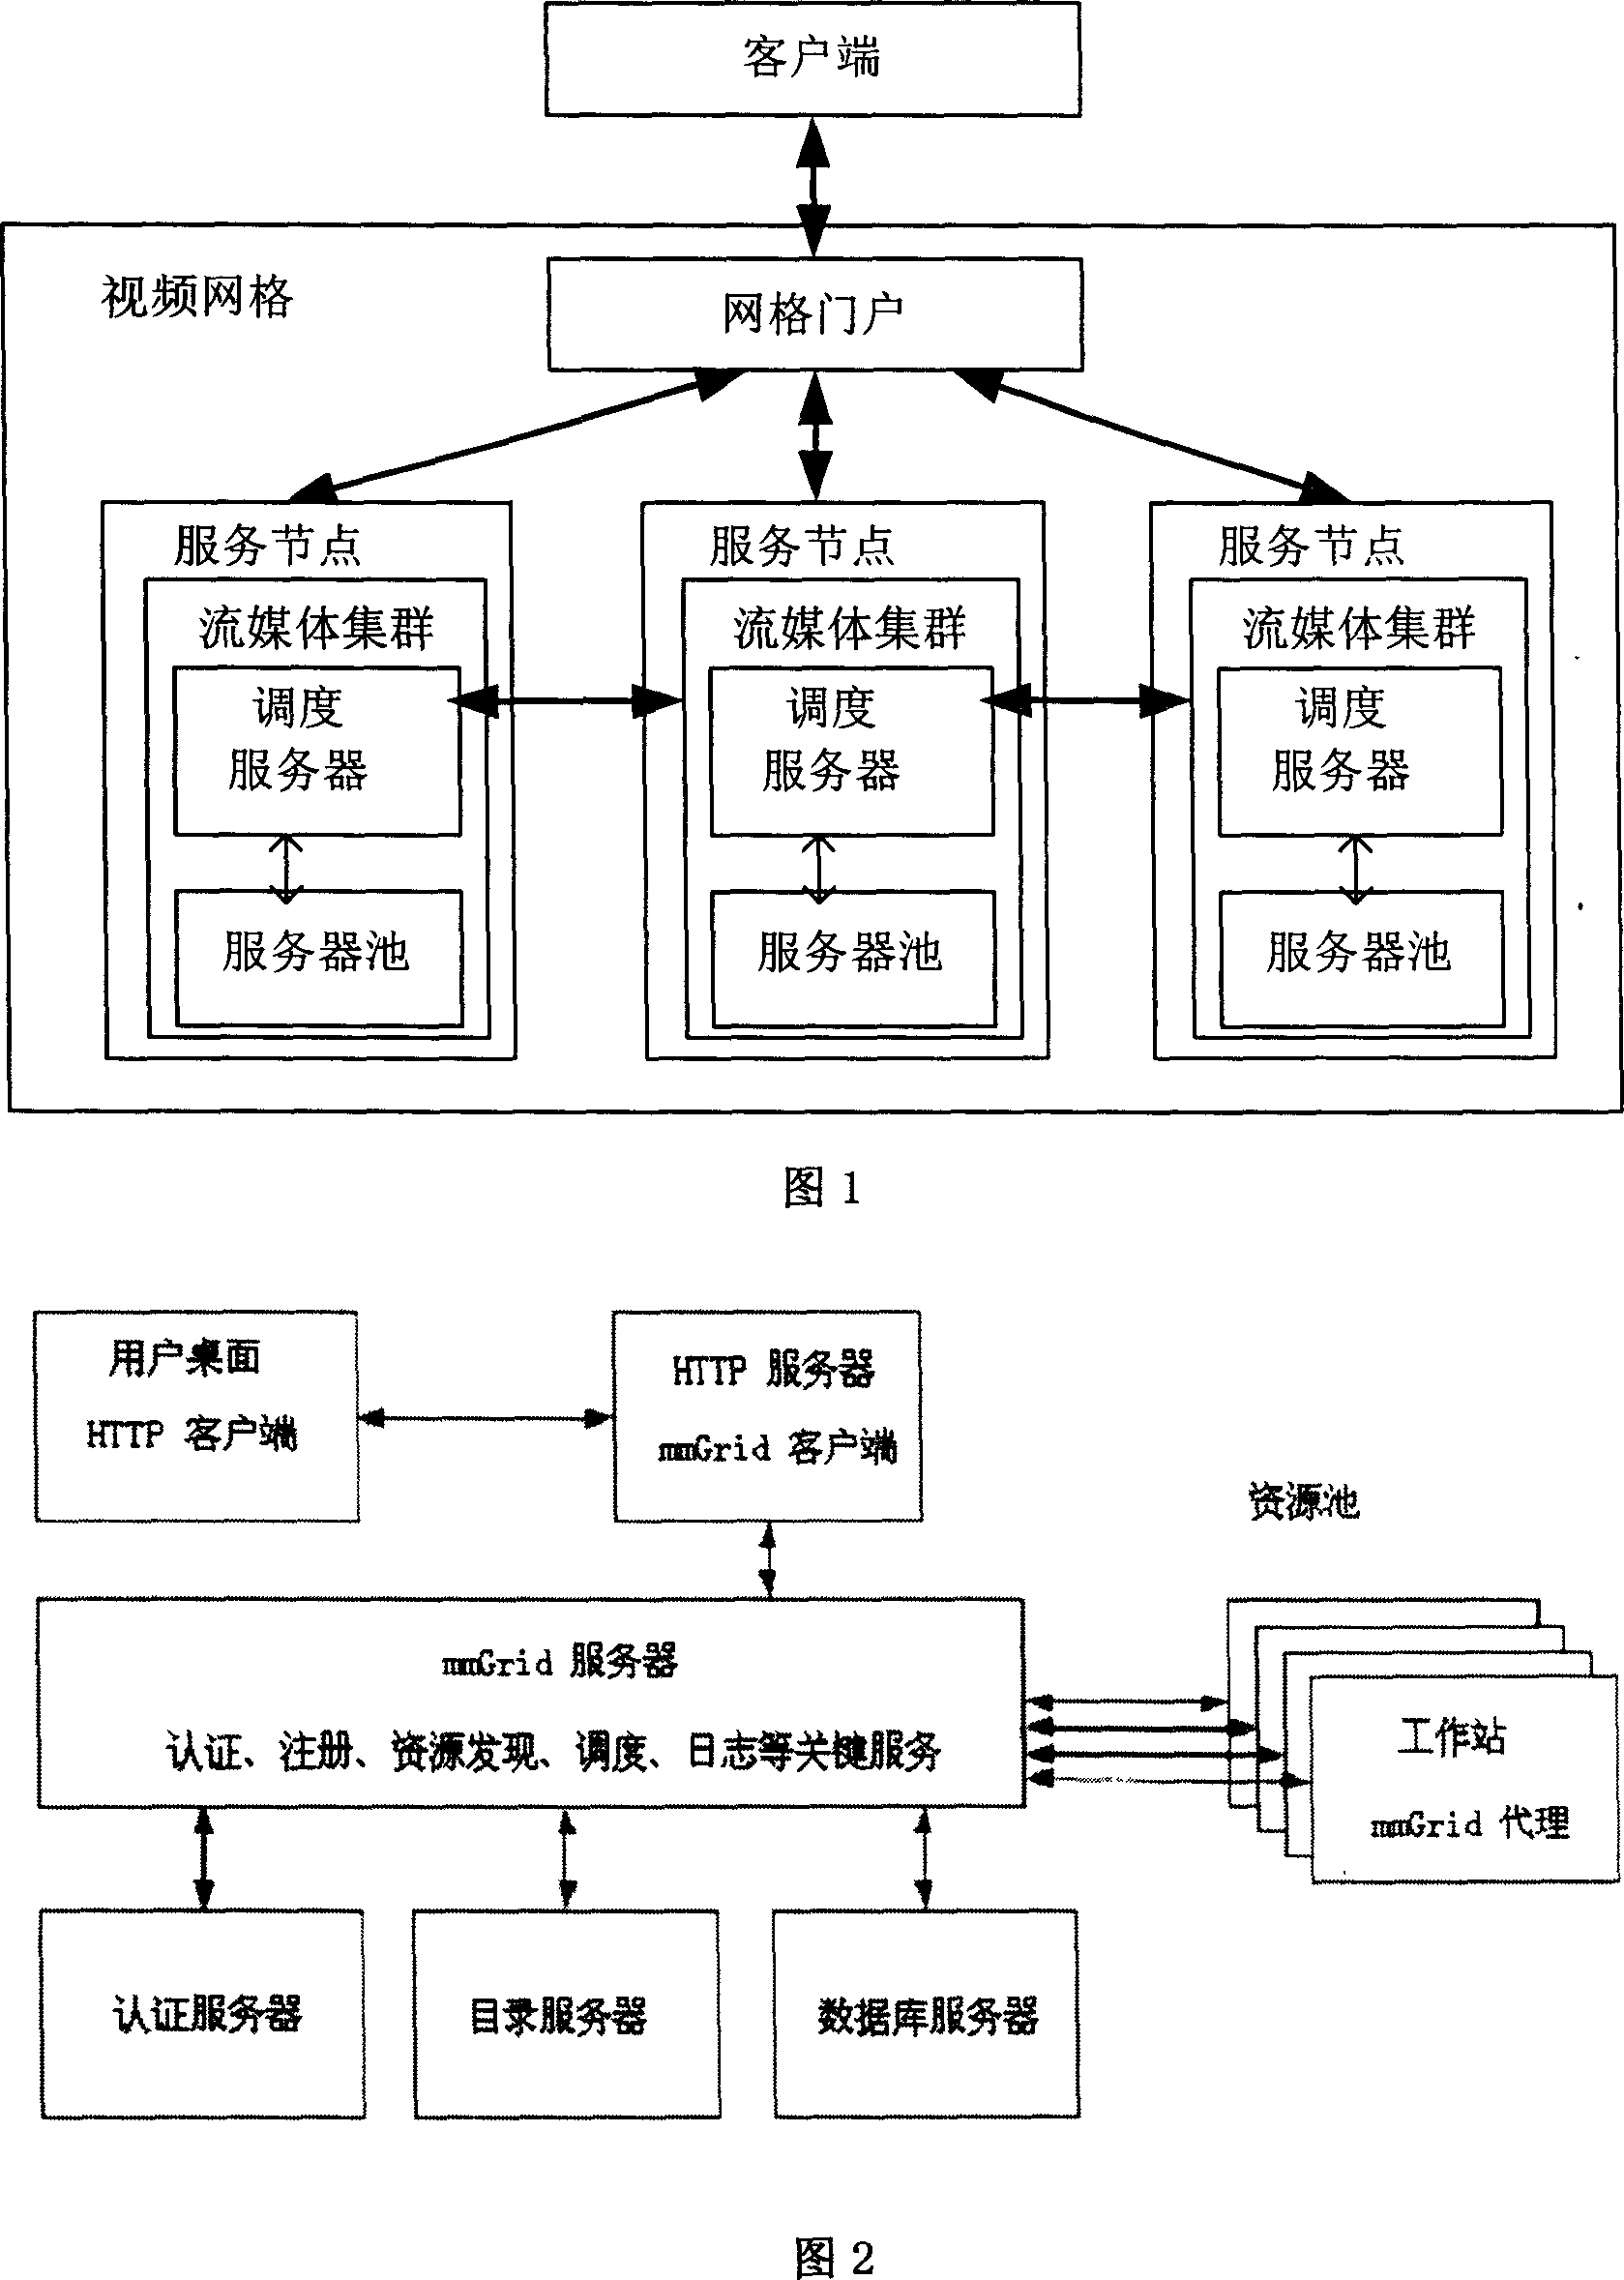 A method for self-adapted load balance scheduling of the video grid